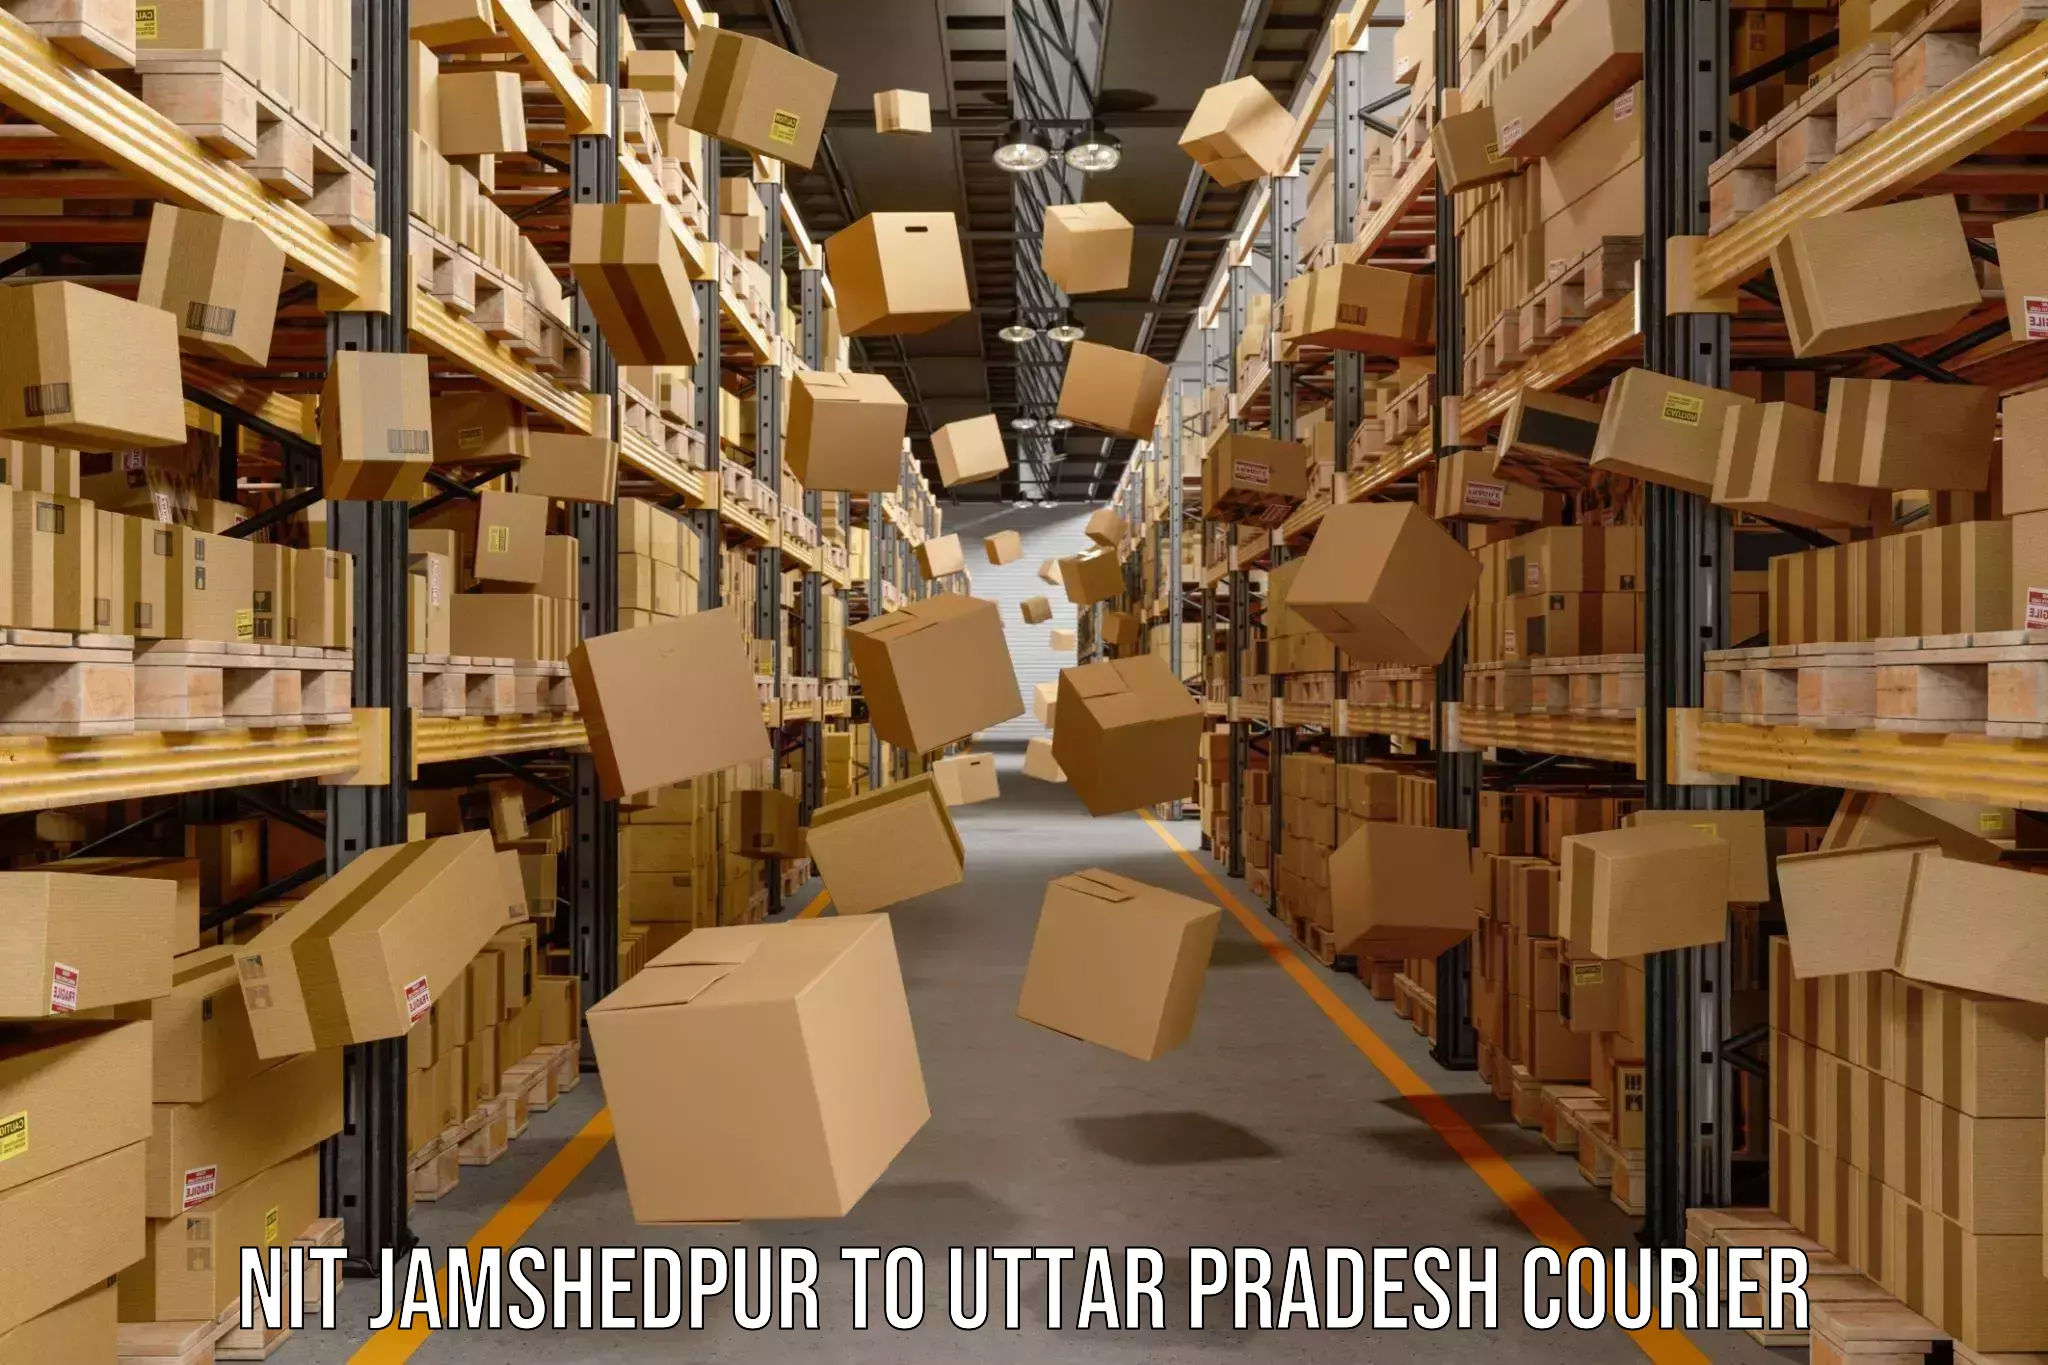 Subscription-based courier NIT Jamshedpur to IIT Kanpur